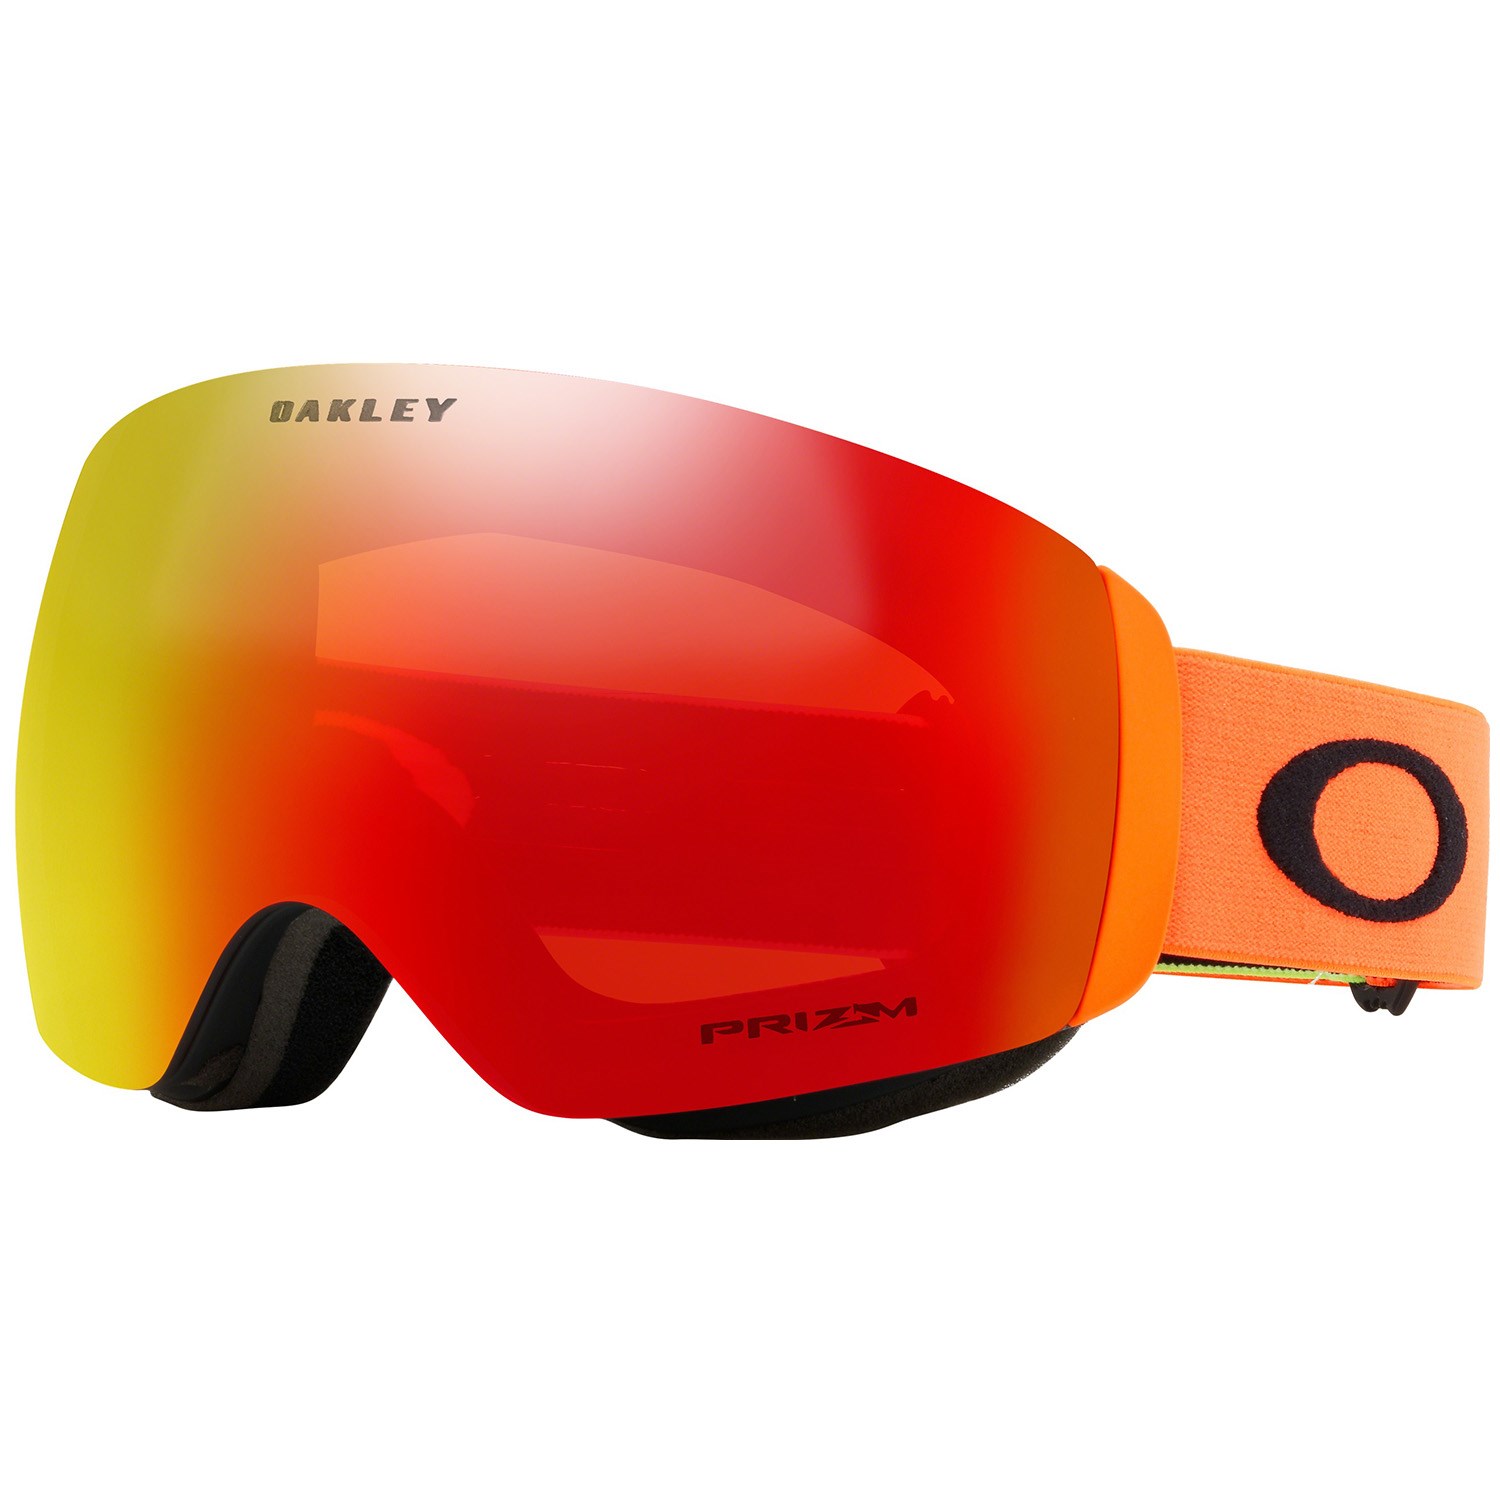 what does xm mean in oakley goggles